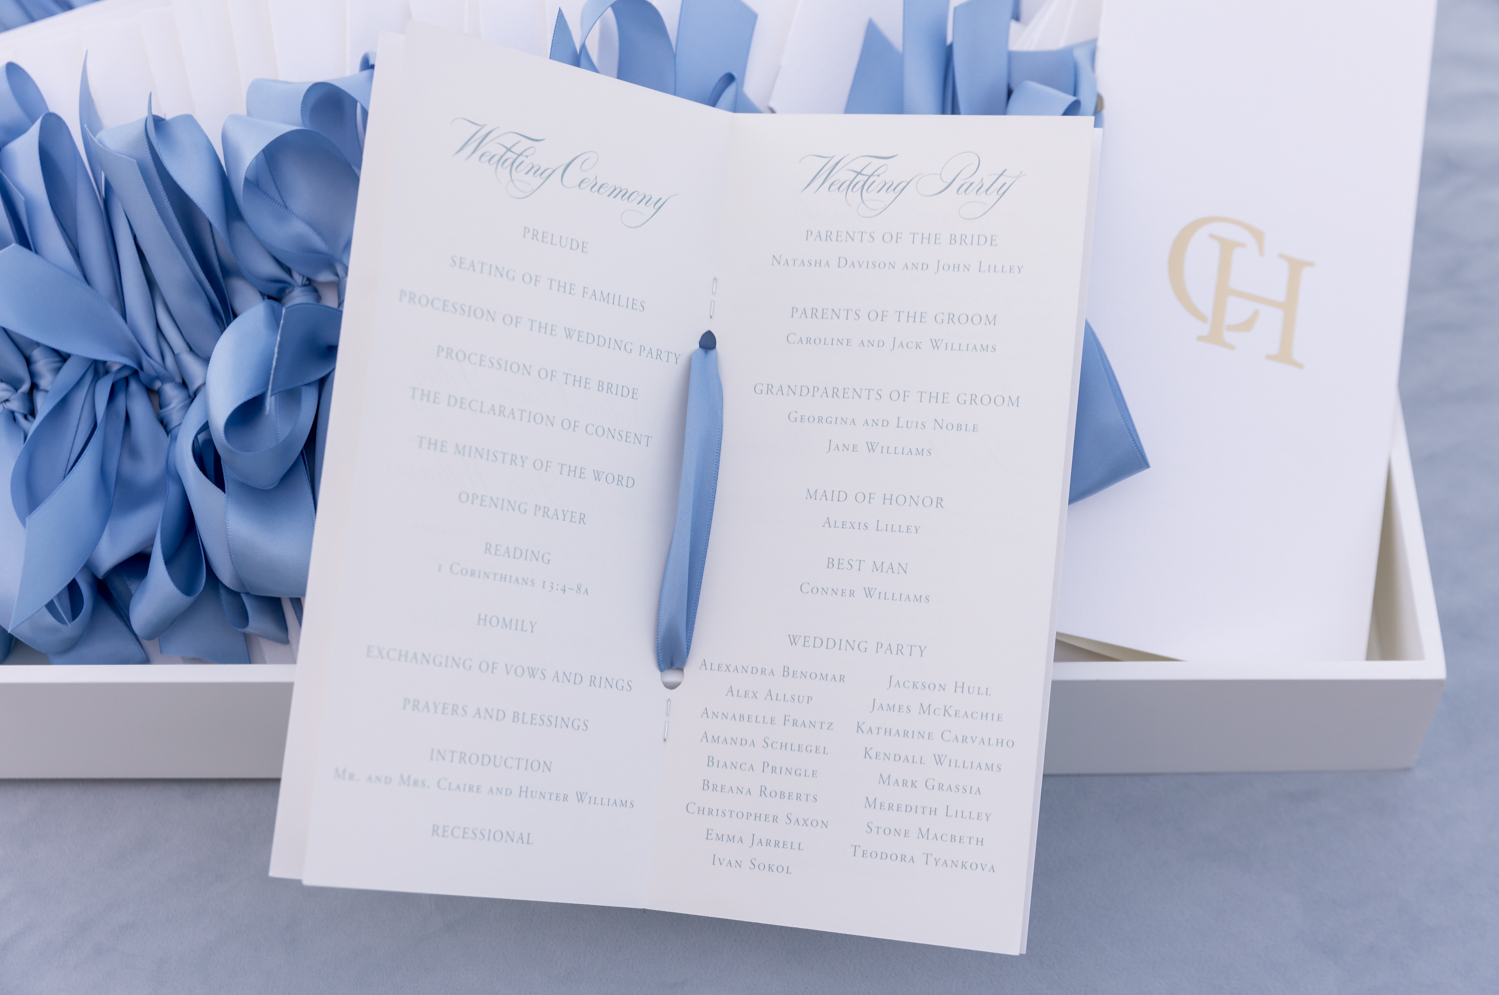 The wedding programs with the ceremony schedule and wedding party. They are white with blue text and a blue ribbon down the seam